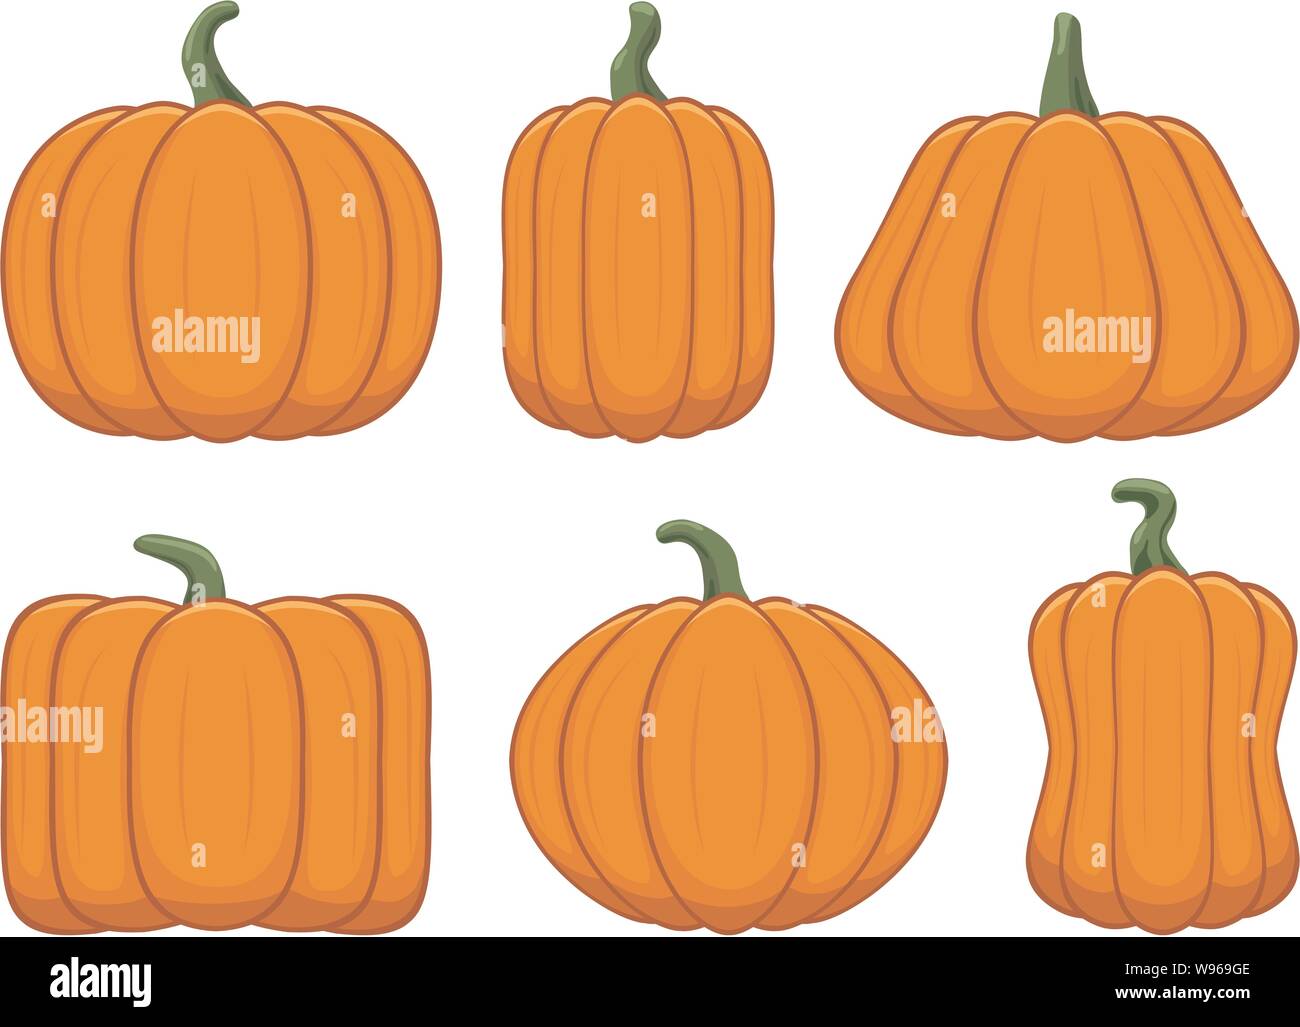 vector set of ripe orange pumpkins isolated on white background. pumpkin vegetable decoration for harvest and thanksgiving illustrations Stock Vector